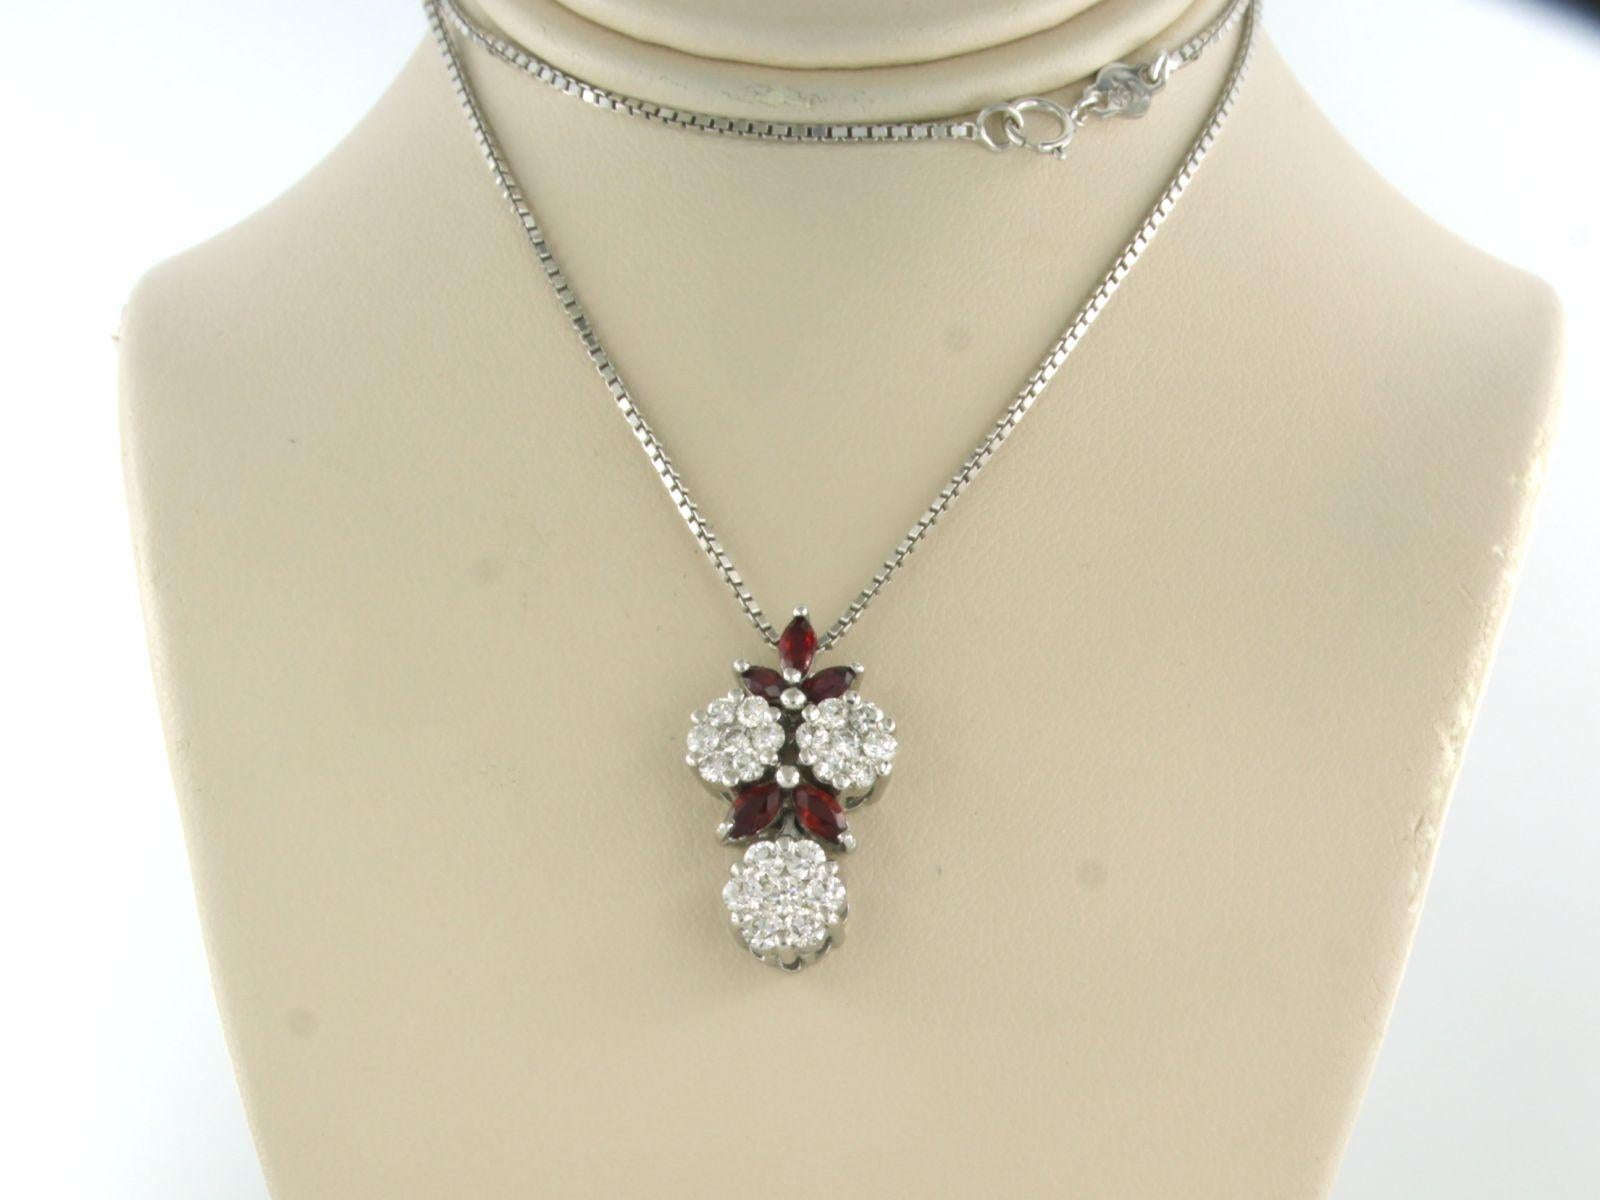 18k white gold necklace with a pendant set with garnet and brilliant cut diamonds. 1.10ct - F/G - VS/SI - 38 cm long

detailed description:

the length of the necklace is 38 cm long by 1.1 mm wide

the size of the pendant is 2.2 cm long by 1.3 cm